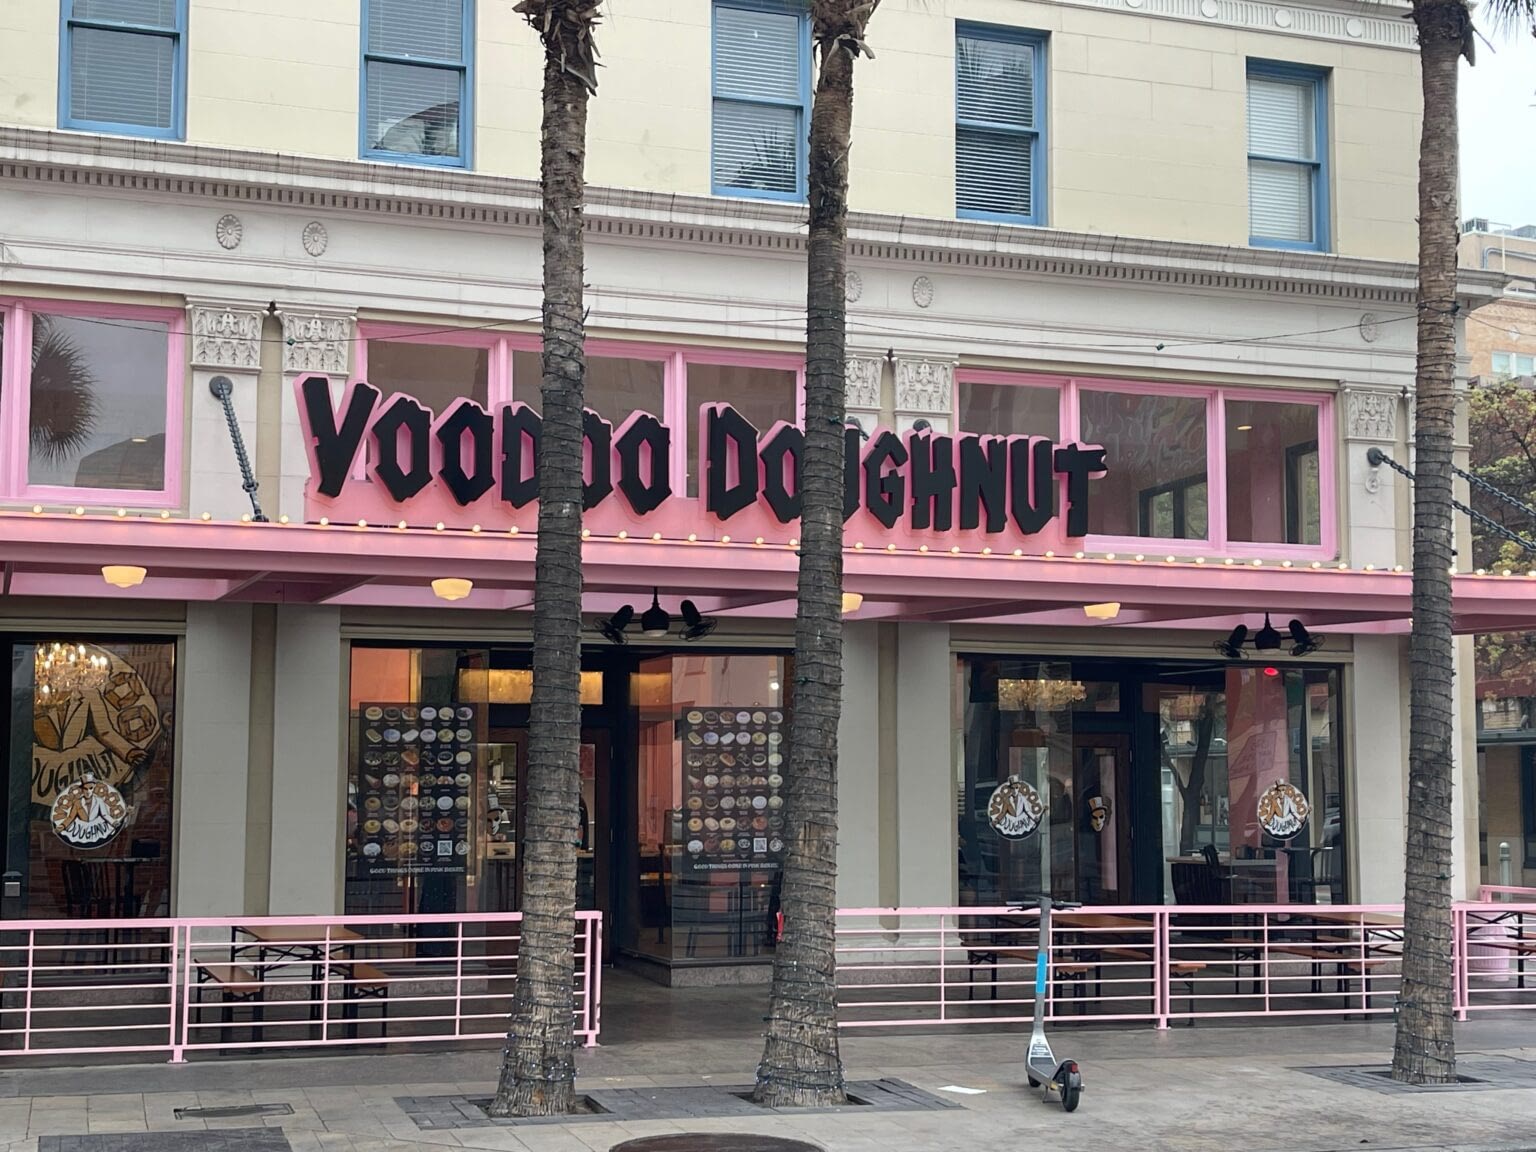 Voodoo Doughnut, founded in Portland, is a new hot spot for donuts in San Antonio.